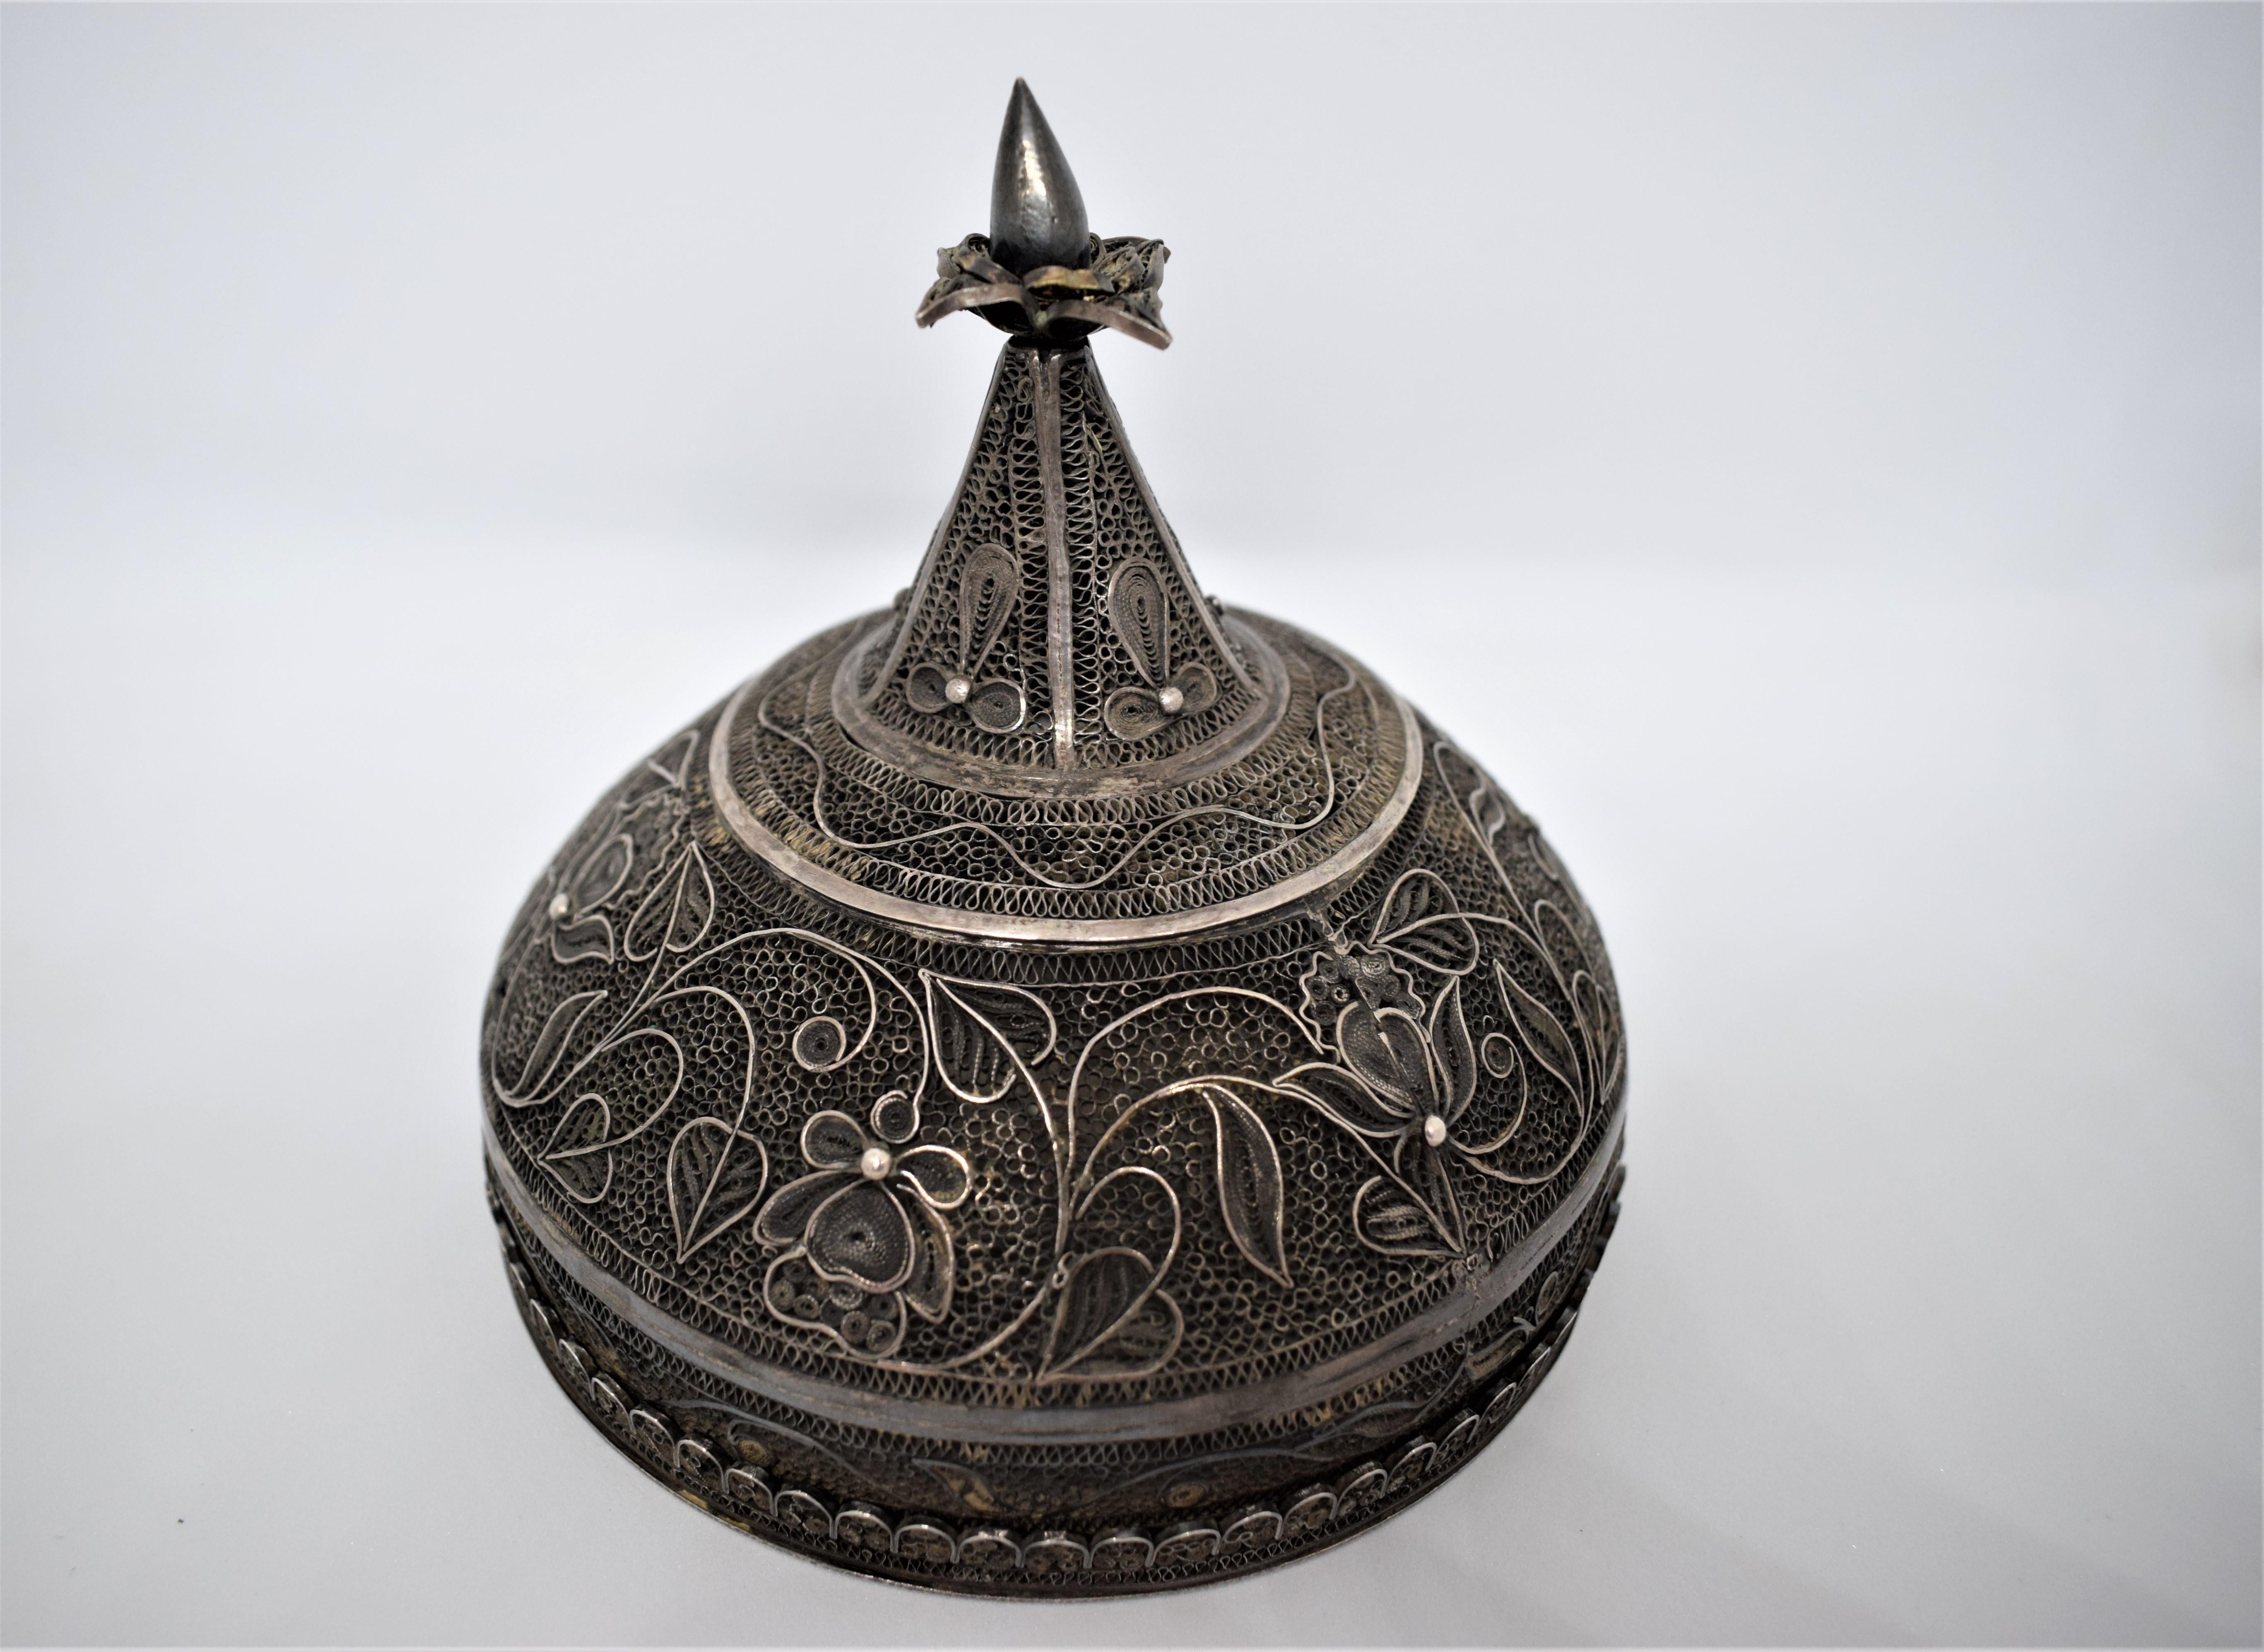 Kashmiri silver betel nut box, Khaas Daan, late 19th century

Betel-chewing is a leisure pastime practiced since ancient times in many parts of south and southeast Asia. It involves wrapping areca nut, slaked lime and other ingredients in a betel